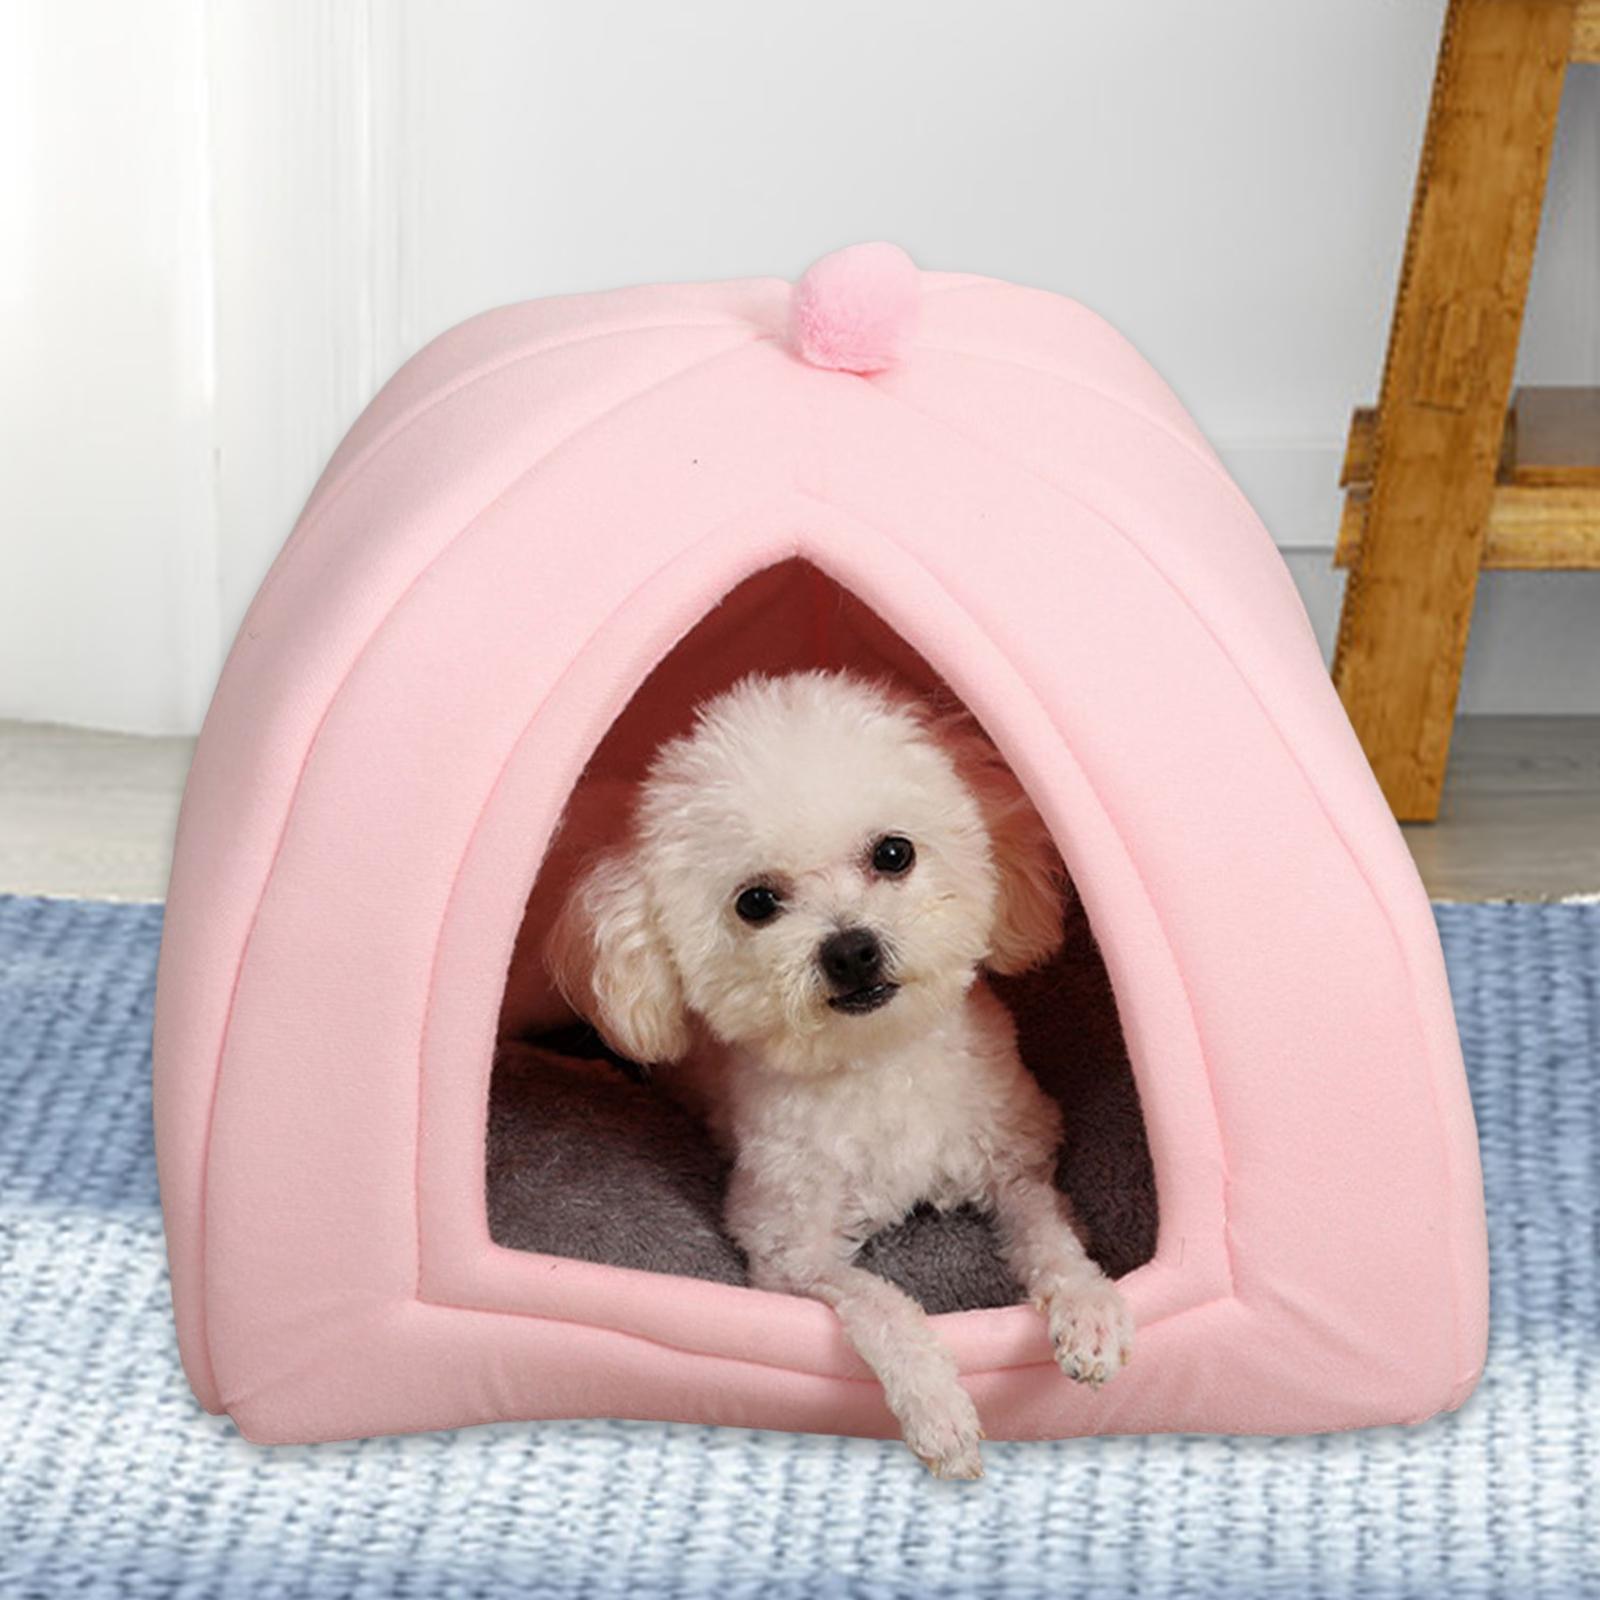 Plush Cave Pet Bed Dog Tent Hut Cozy Removable Washable Pad Cat Warm House for Kitten Sleeping Rabbit